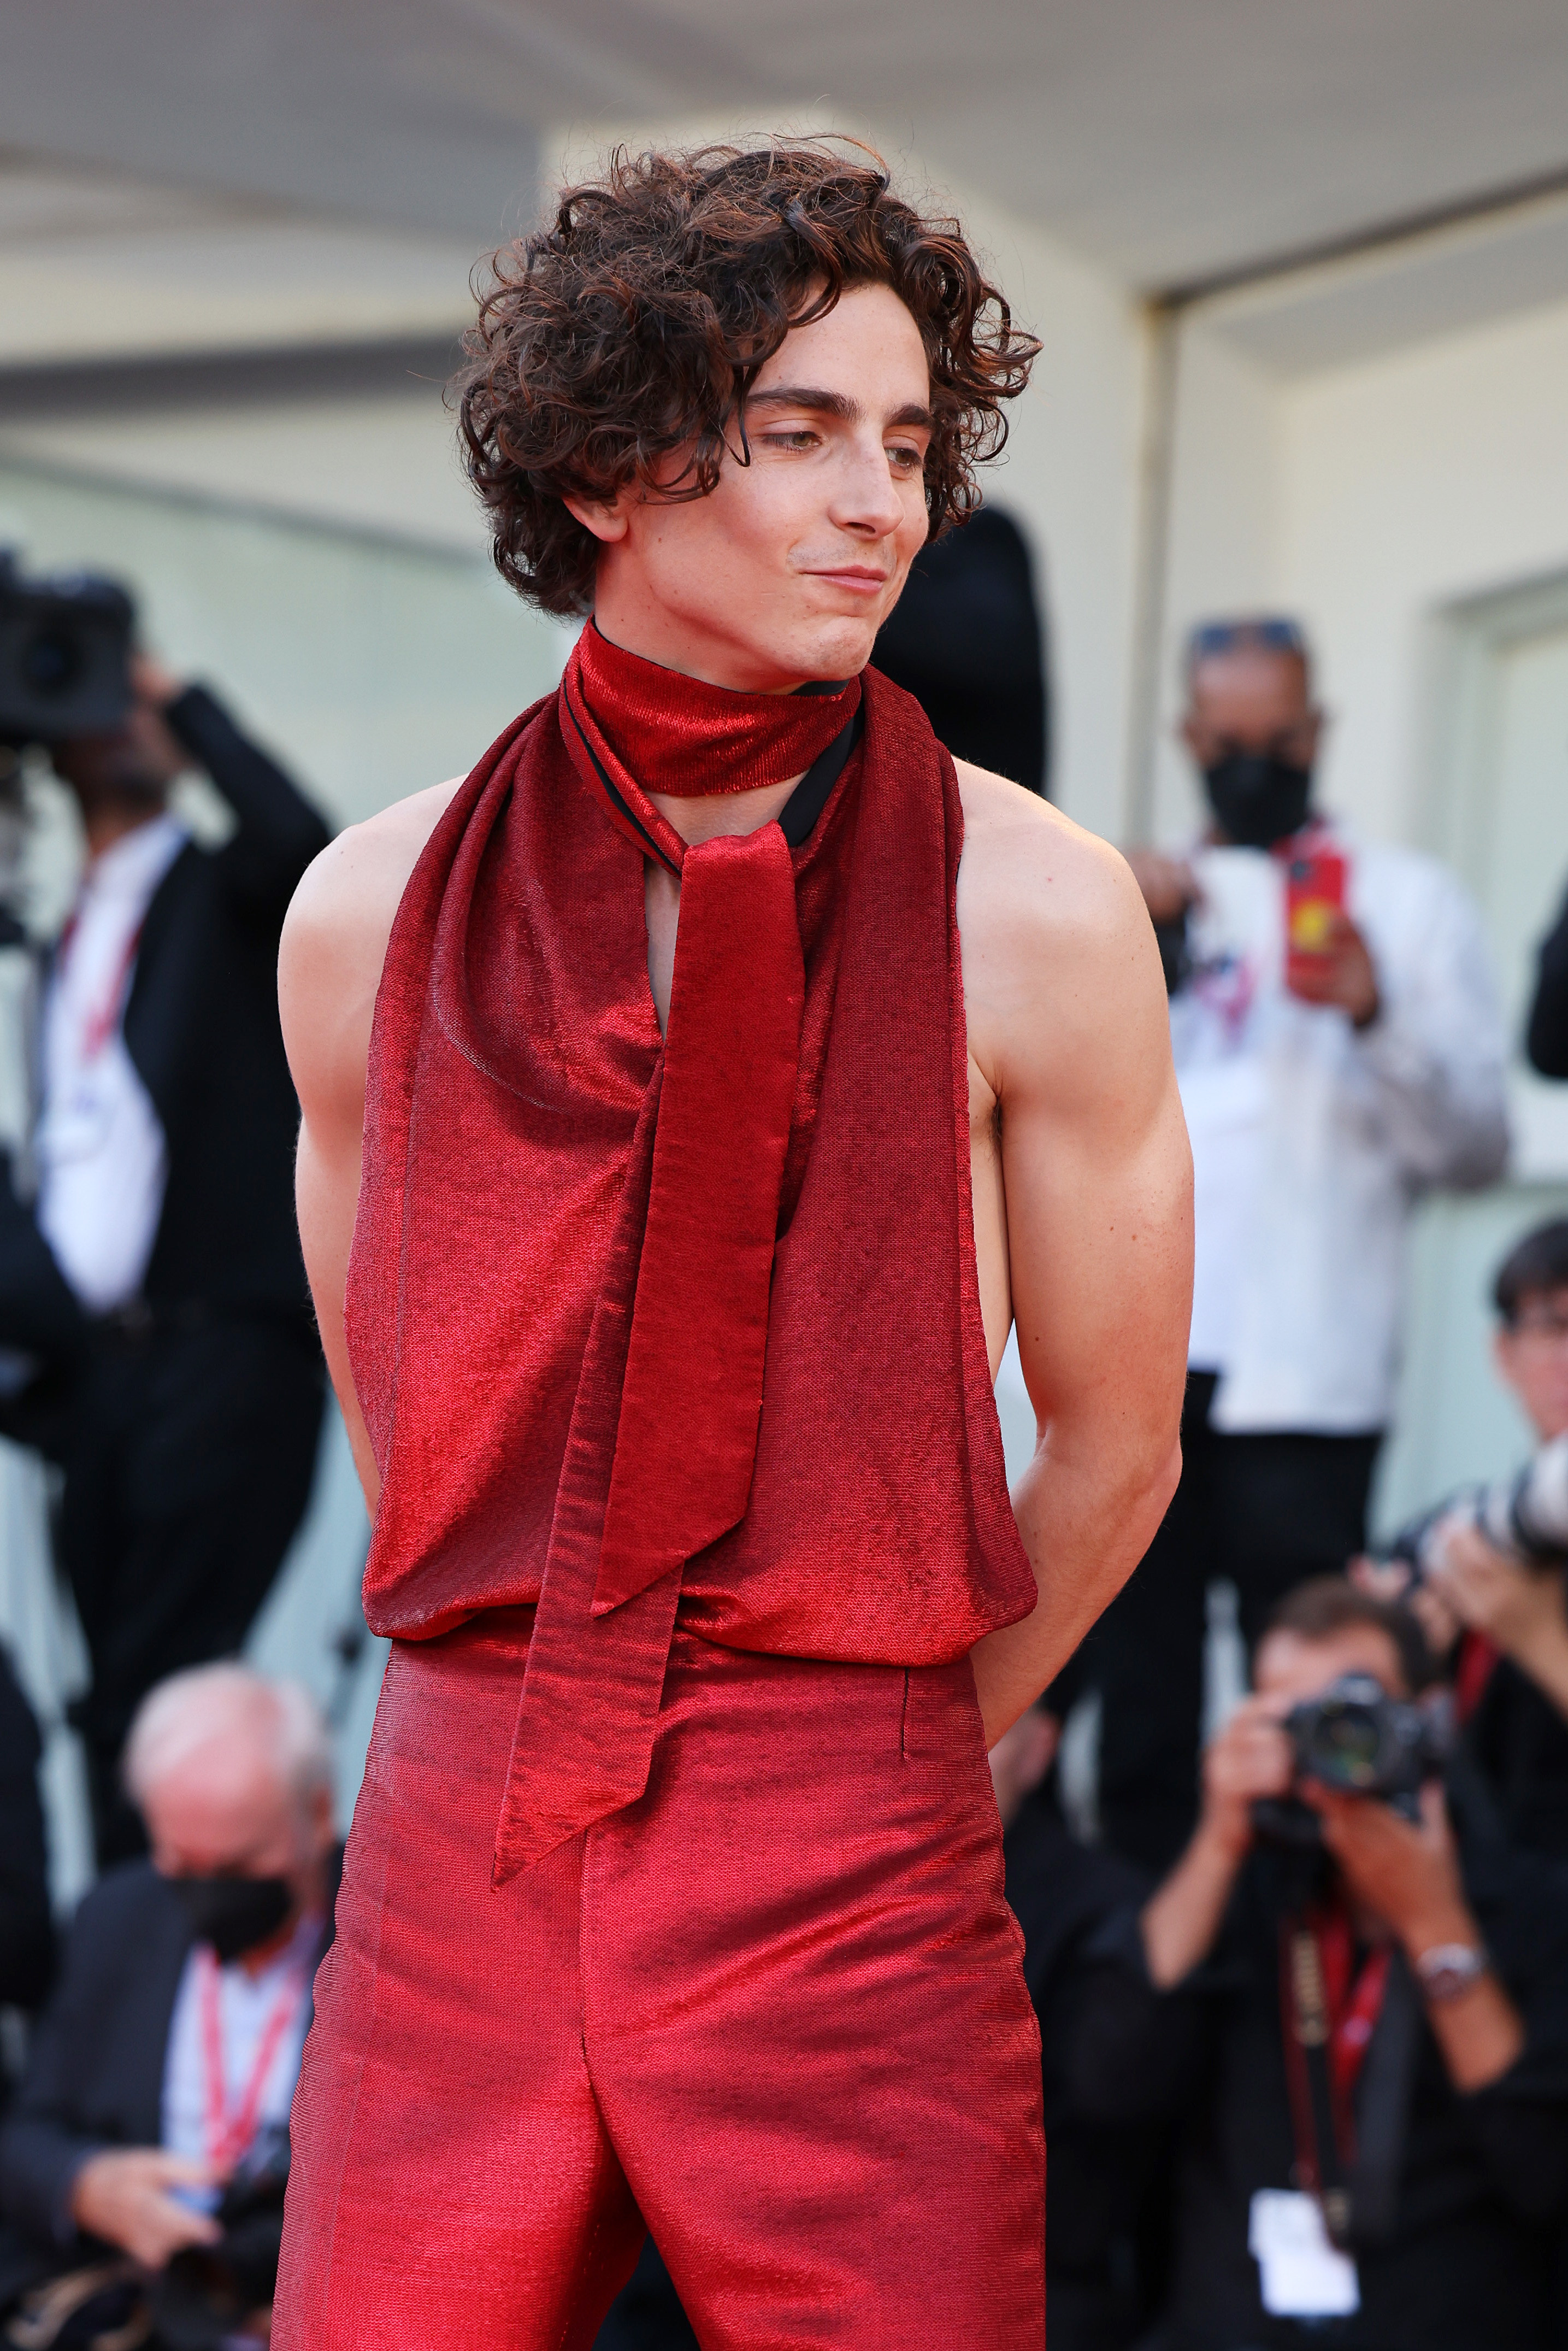 timotee on the red carpet